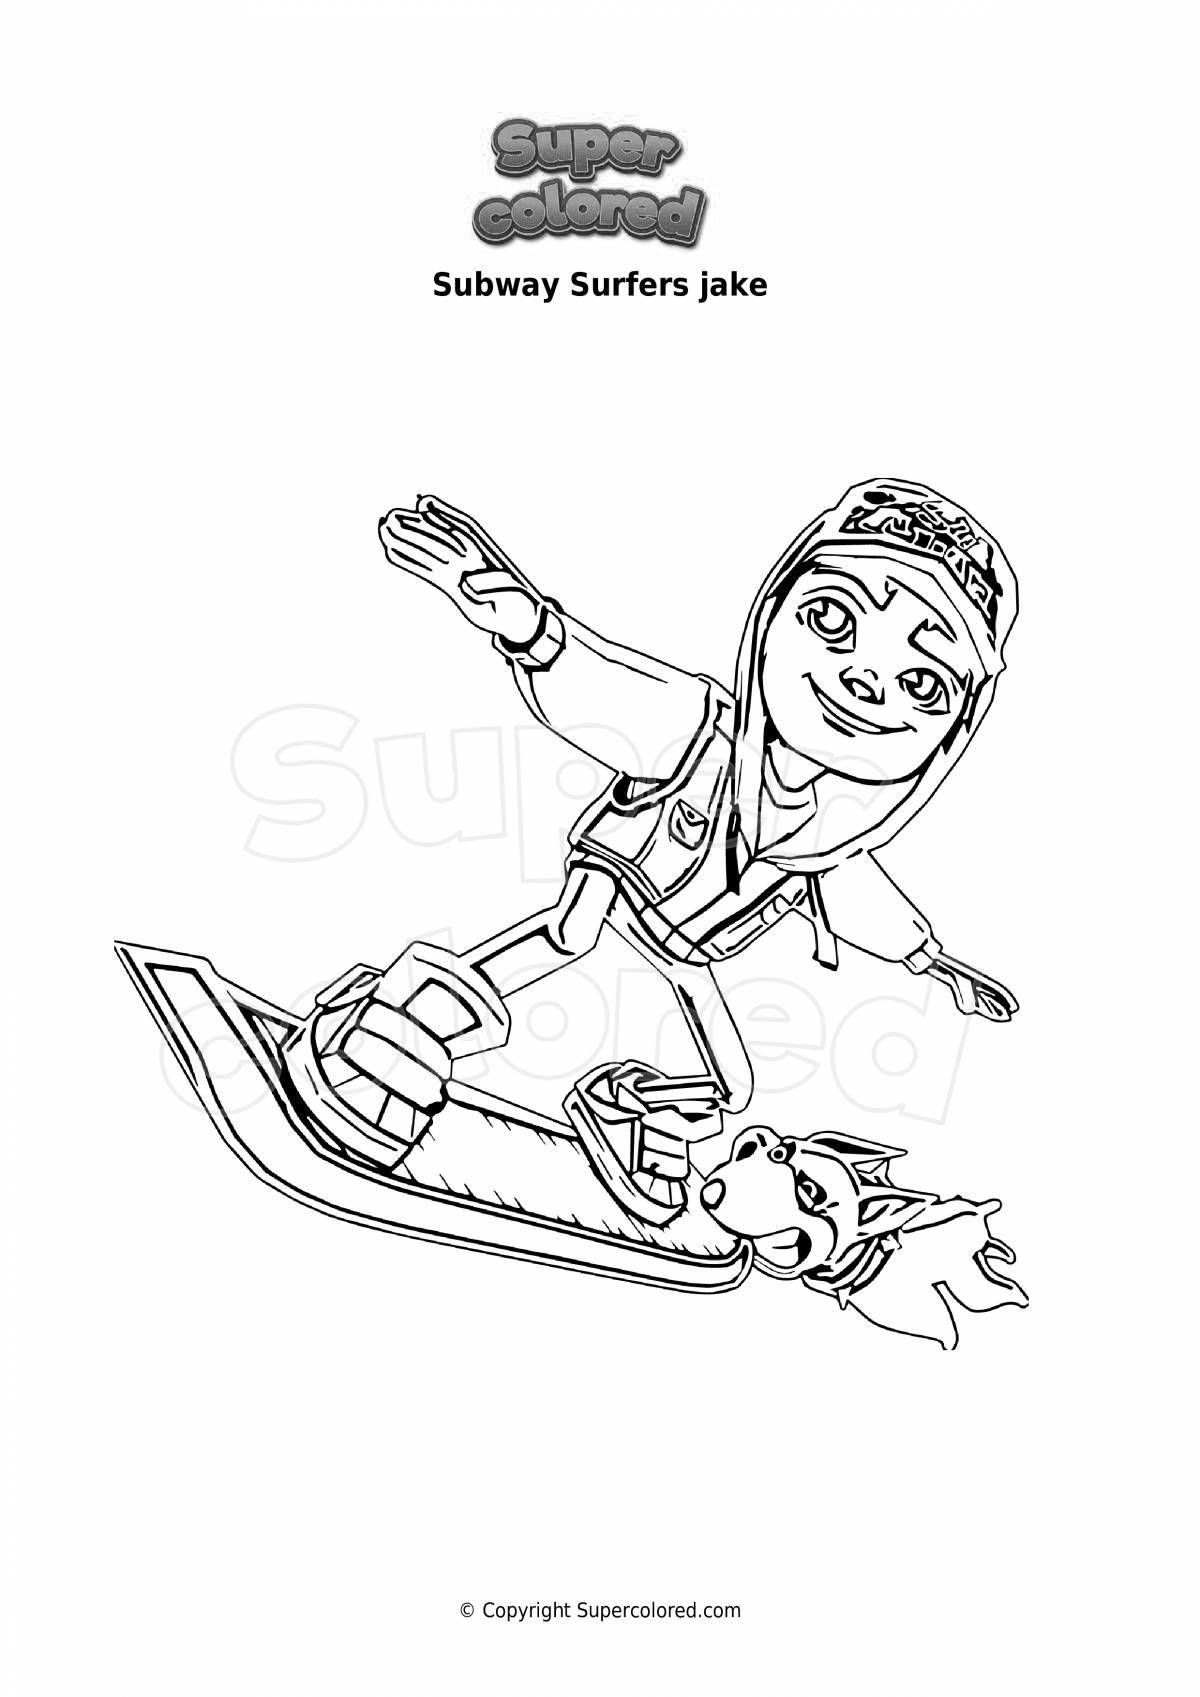 Subway surfers playful coloring